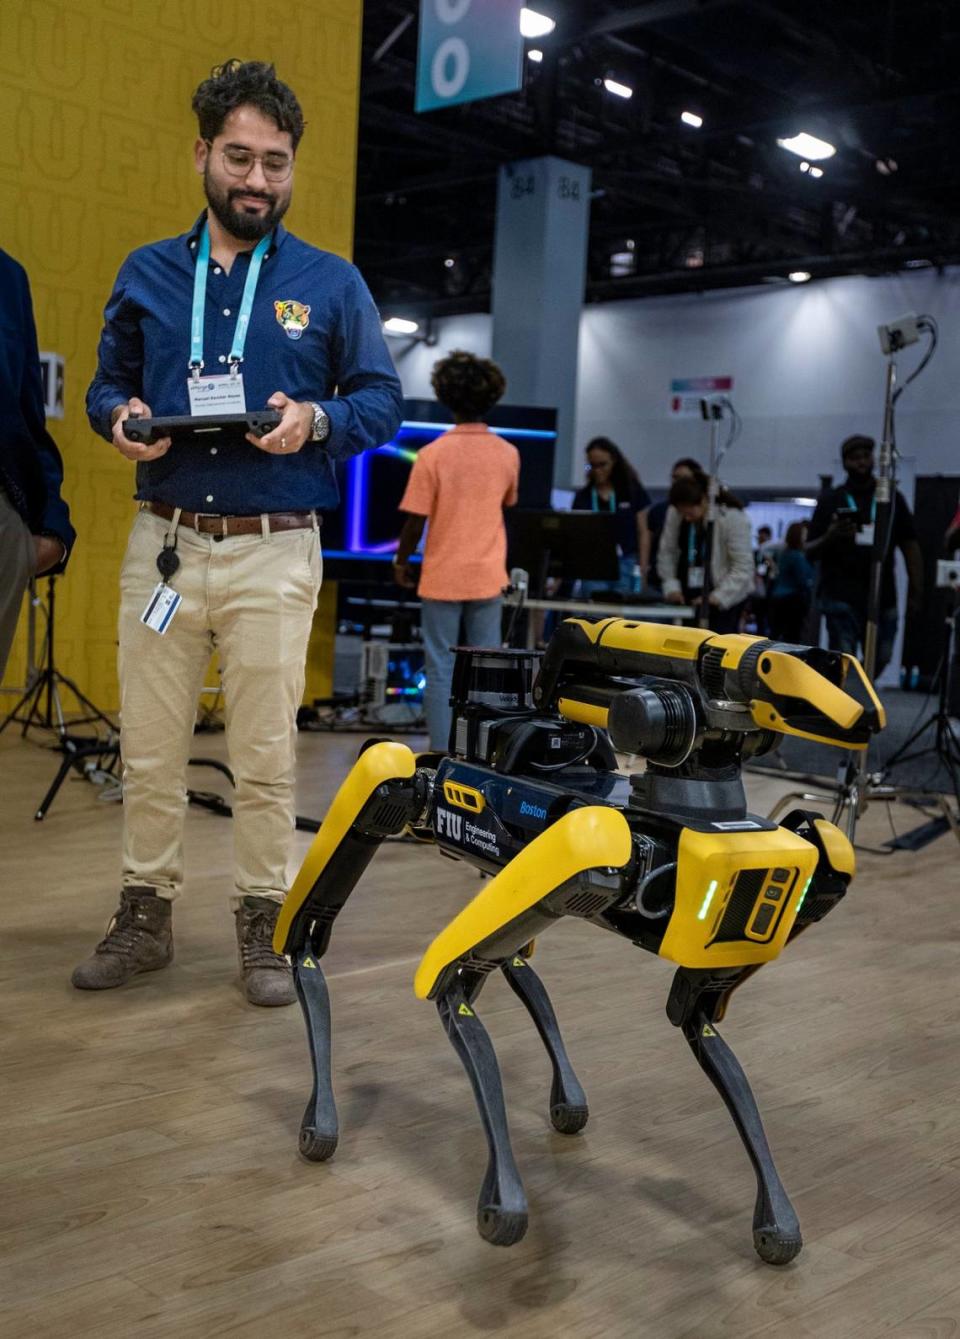 A robotic dog affectionately called Sunshine is put to the test in the FIU booth at eMerge Americas conference on April 20, 2023.